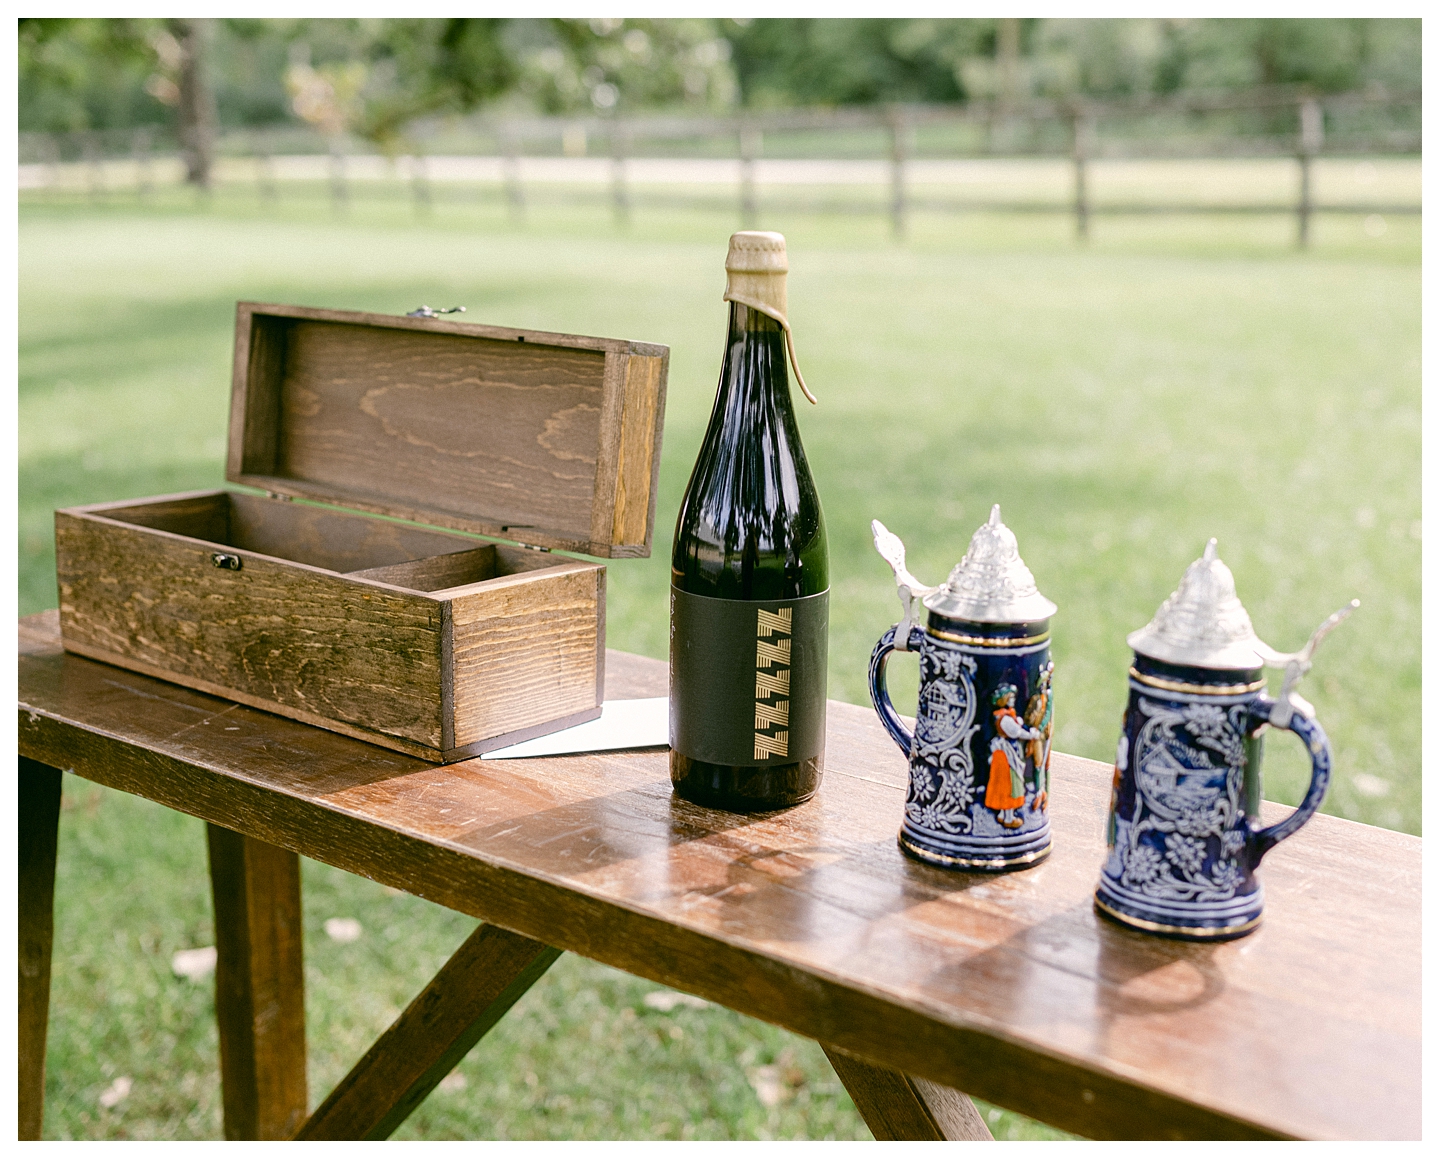 The couple's beer unity ceremony at a Mayowood Stone Barn Wedding. Photo by Kayla Lee.